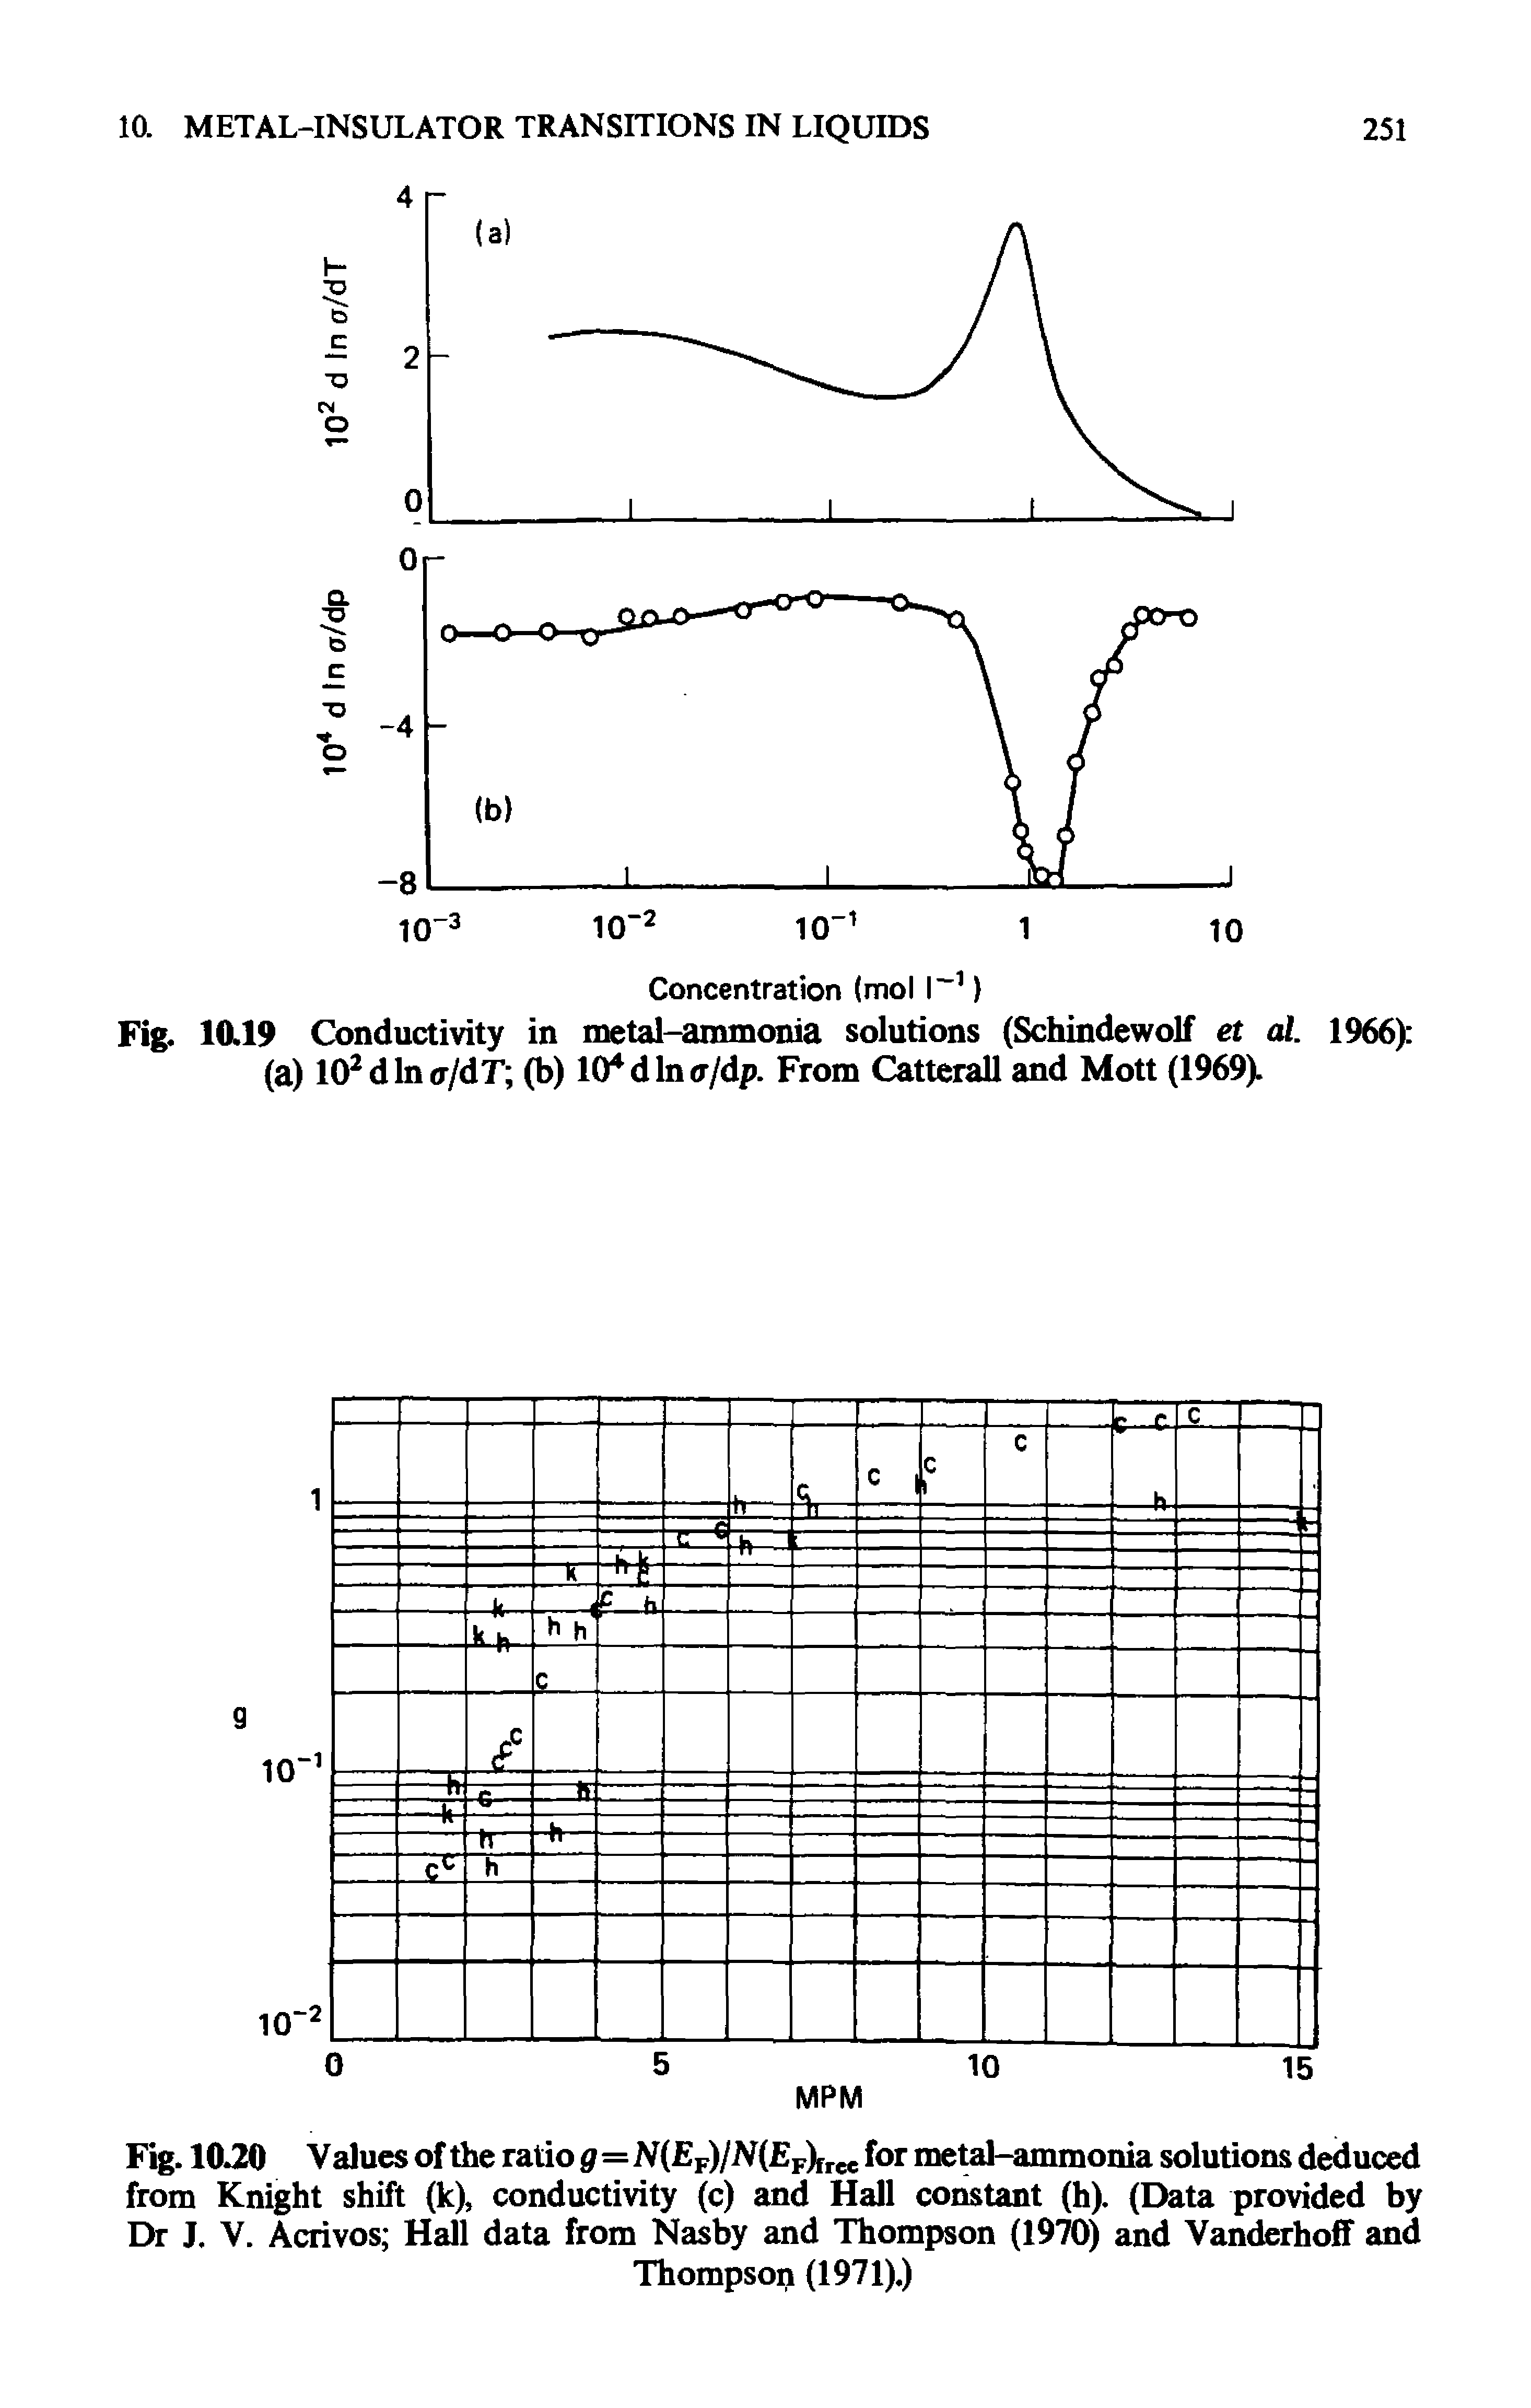 Fig. 10.20 Values of the ratio g=N(EF)/N(EF)frcc for metal-ammonia solutions deduced from Knight shift (k), conductivity (c) and Hall constant (h). (Data provided by Dr J. V. Acrivos Hall data from Nasby and Thompson (1970) and Vanderhoff and...